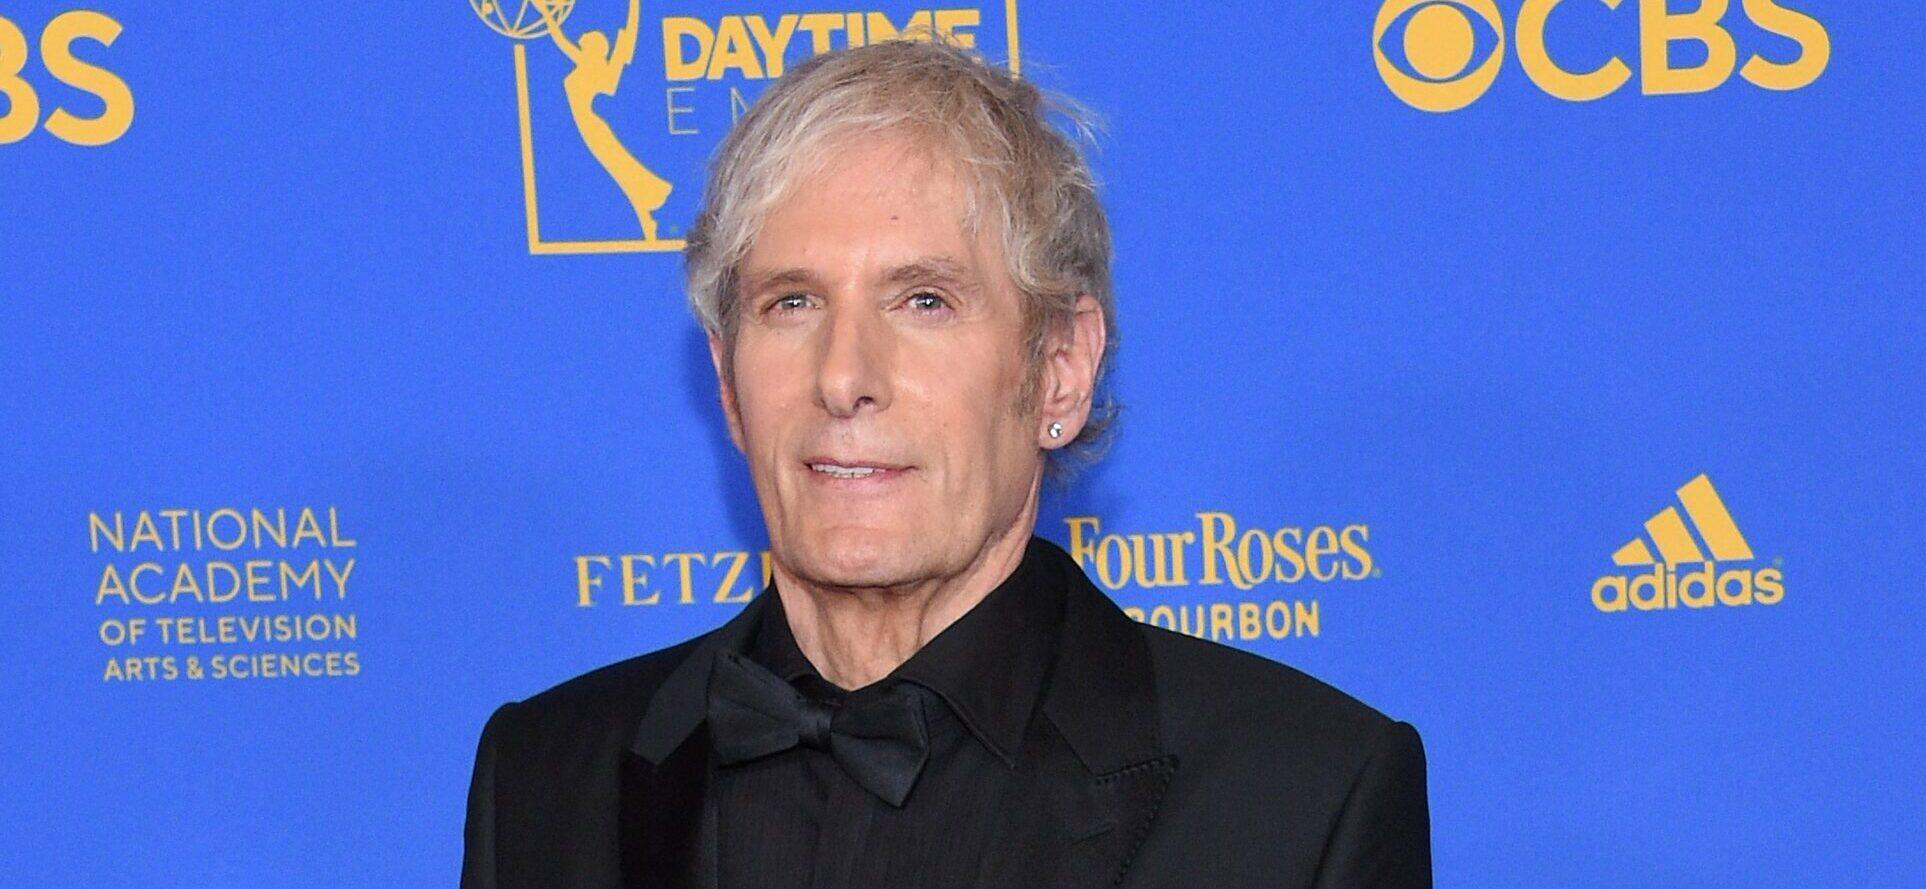 Michael Bolton at The Daytime Emmy Awards